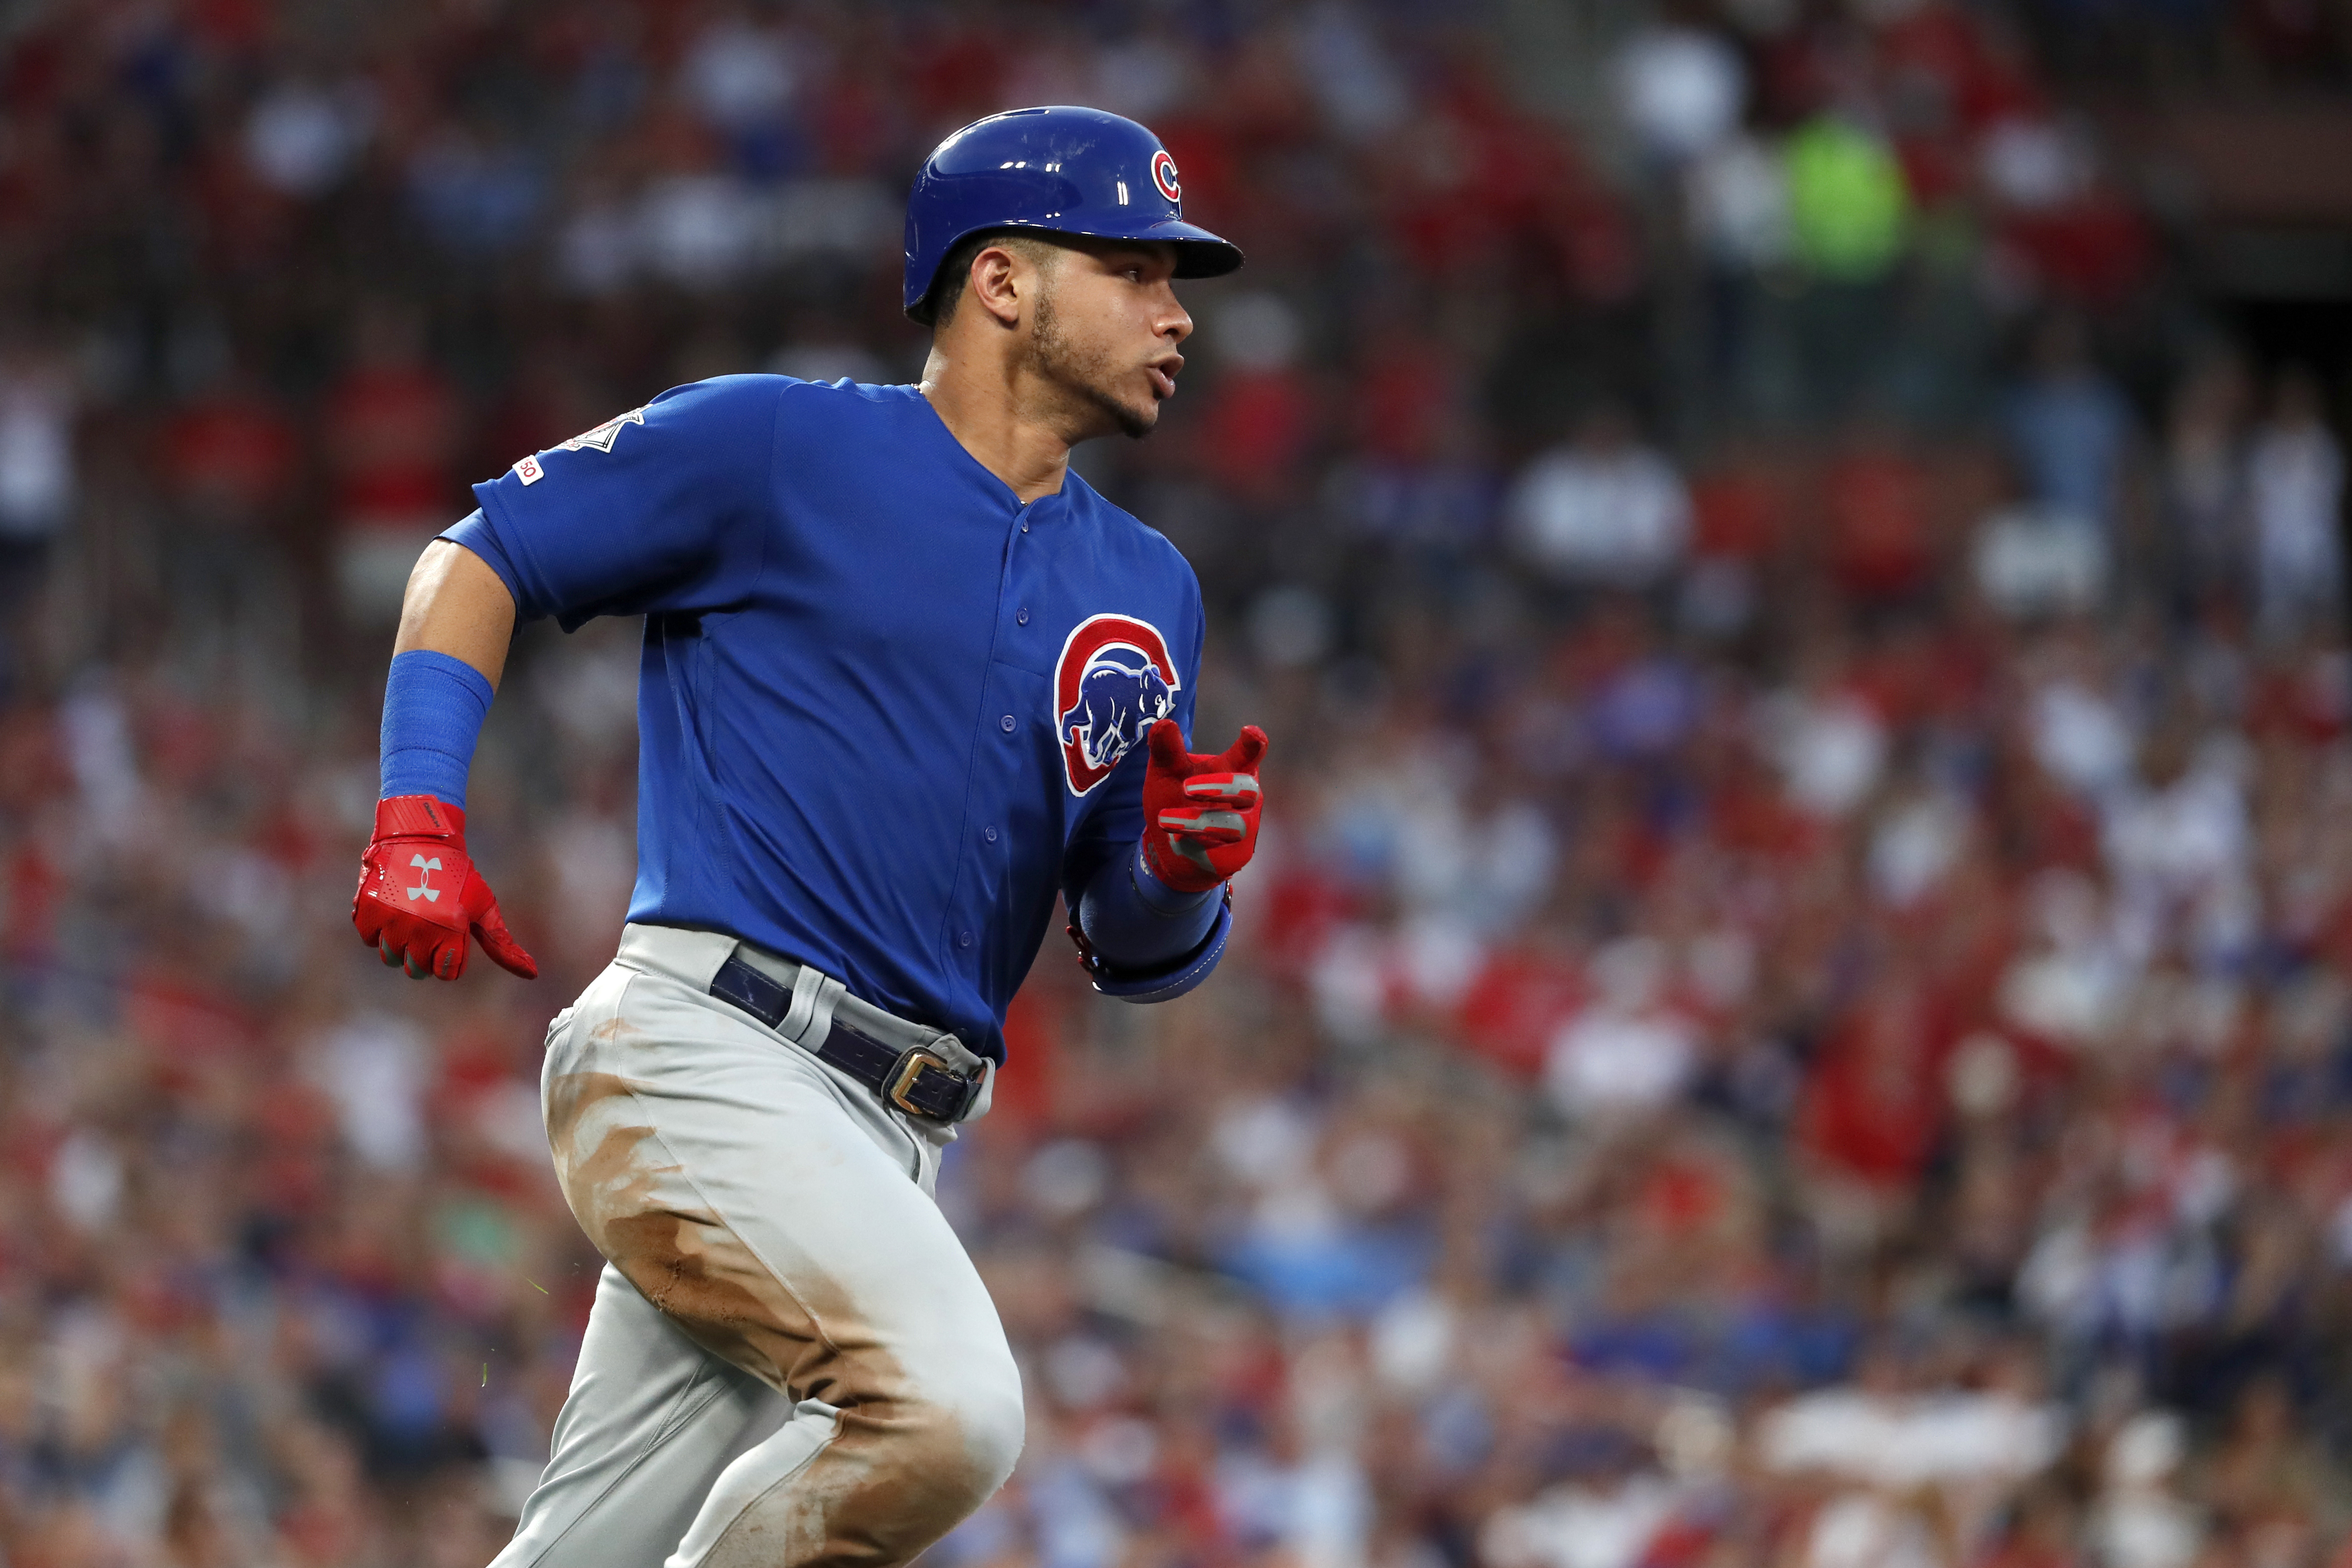 Cubs' Contreras out with hamstring injury, extent uncertain